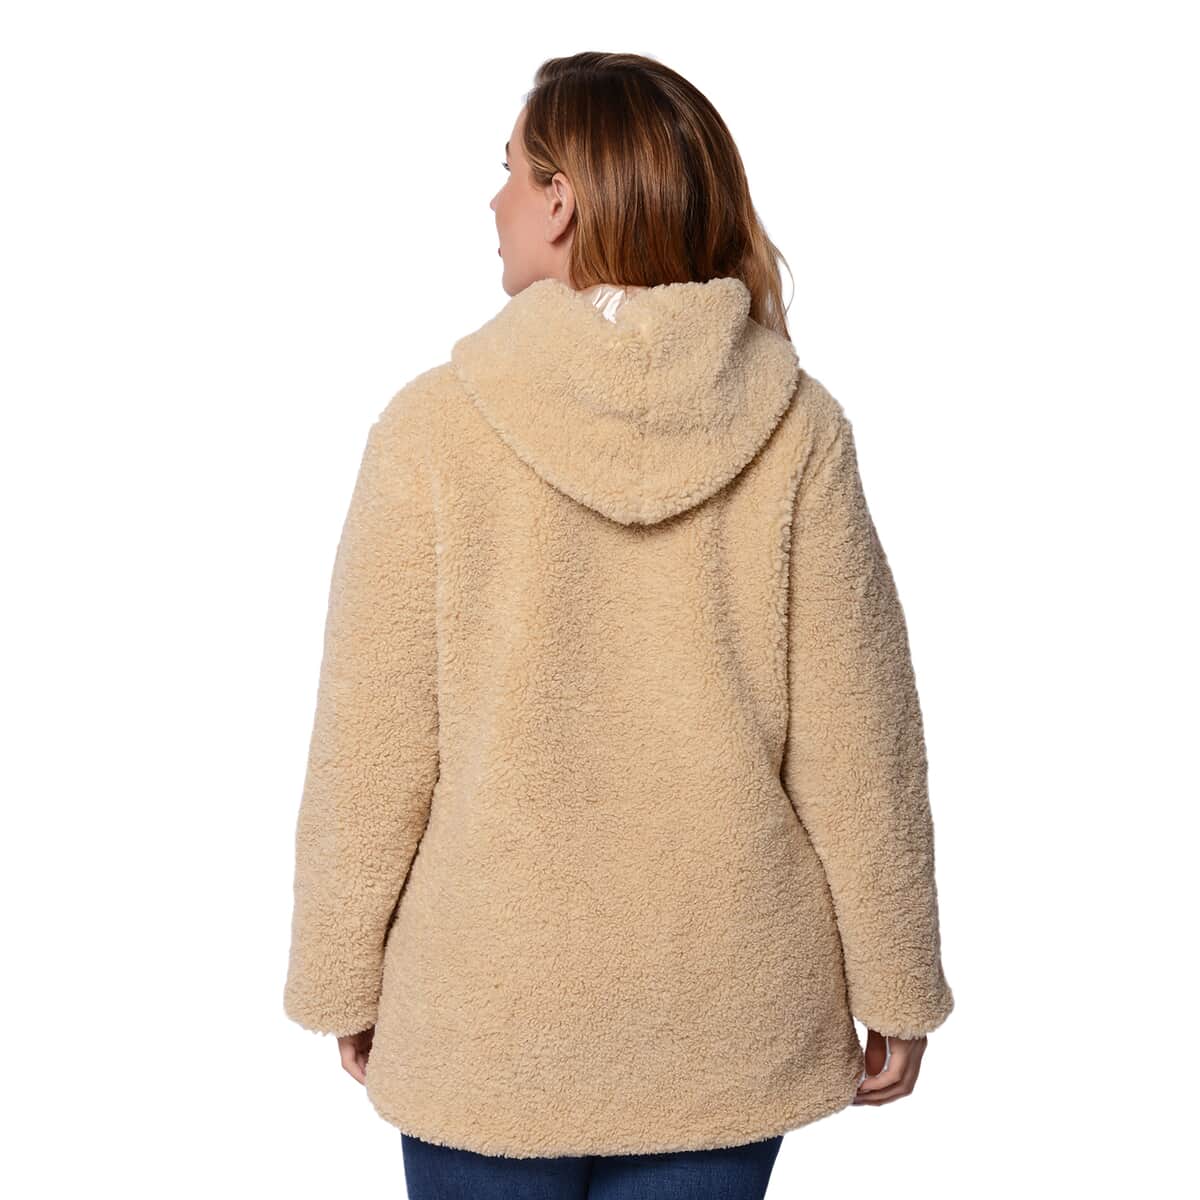 Beige Satin Lined Faux Fur Hooded Jacket with Front Pockets (M, 100% Polyester) image number 1